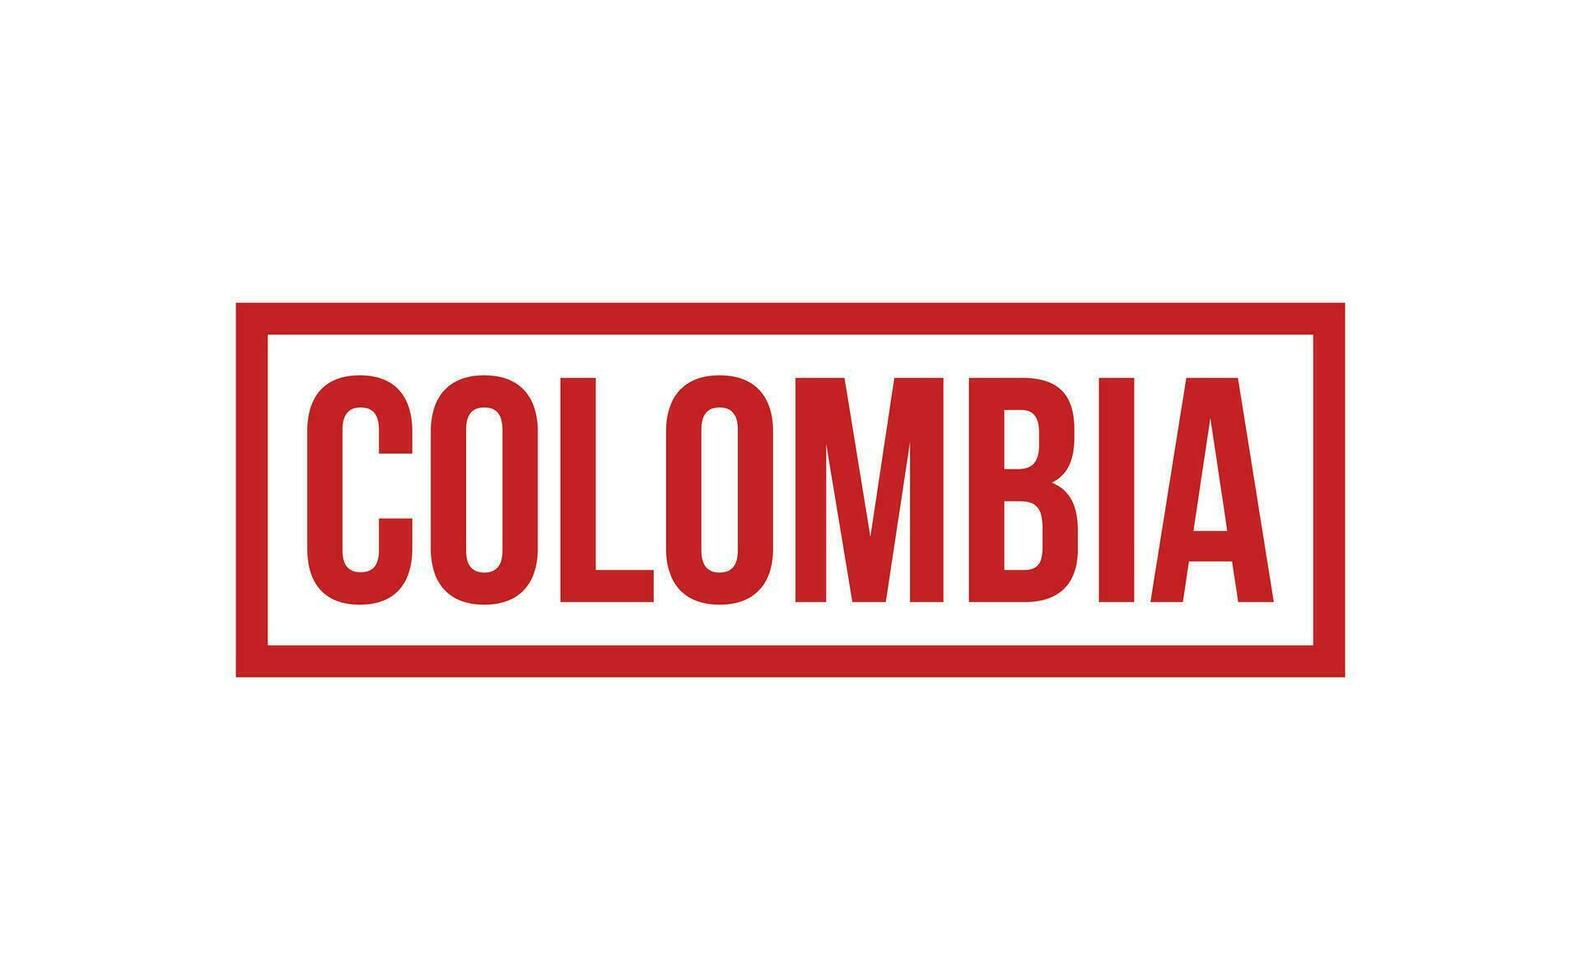 Colombia Rubber Stamp Seal Vector